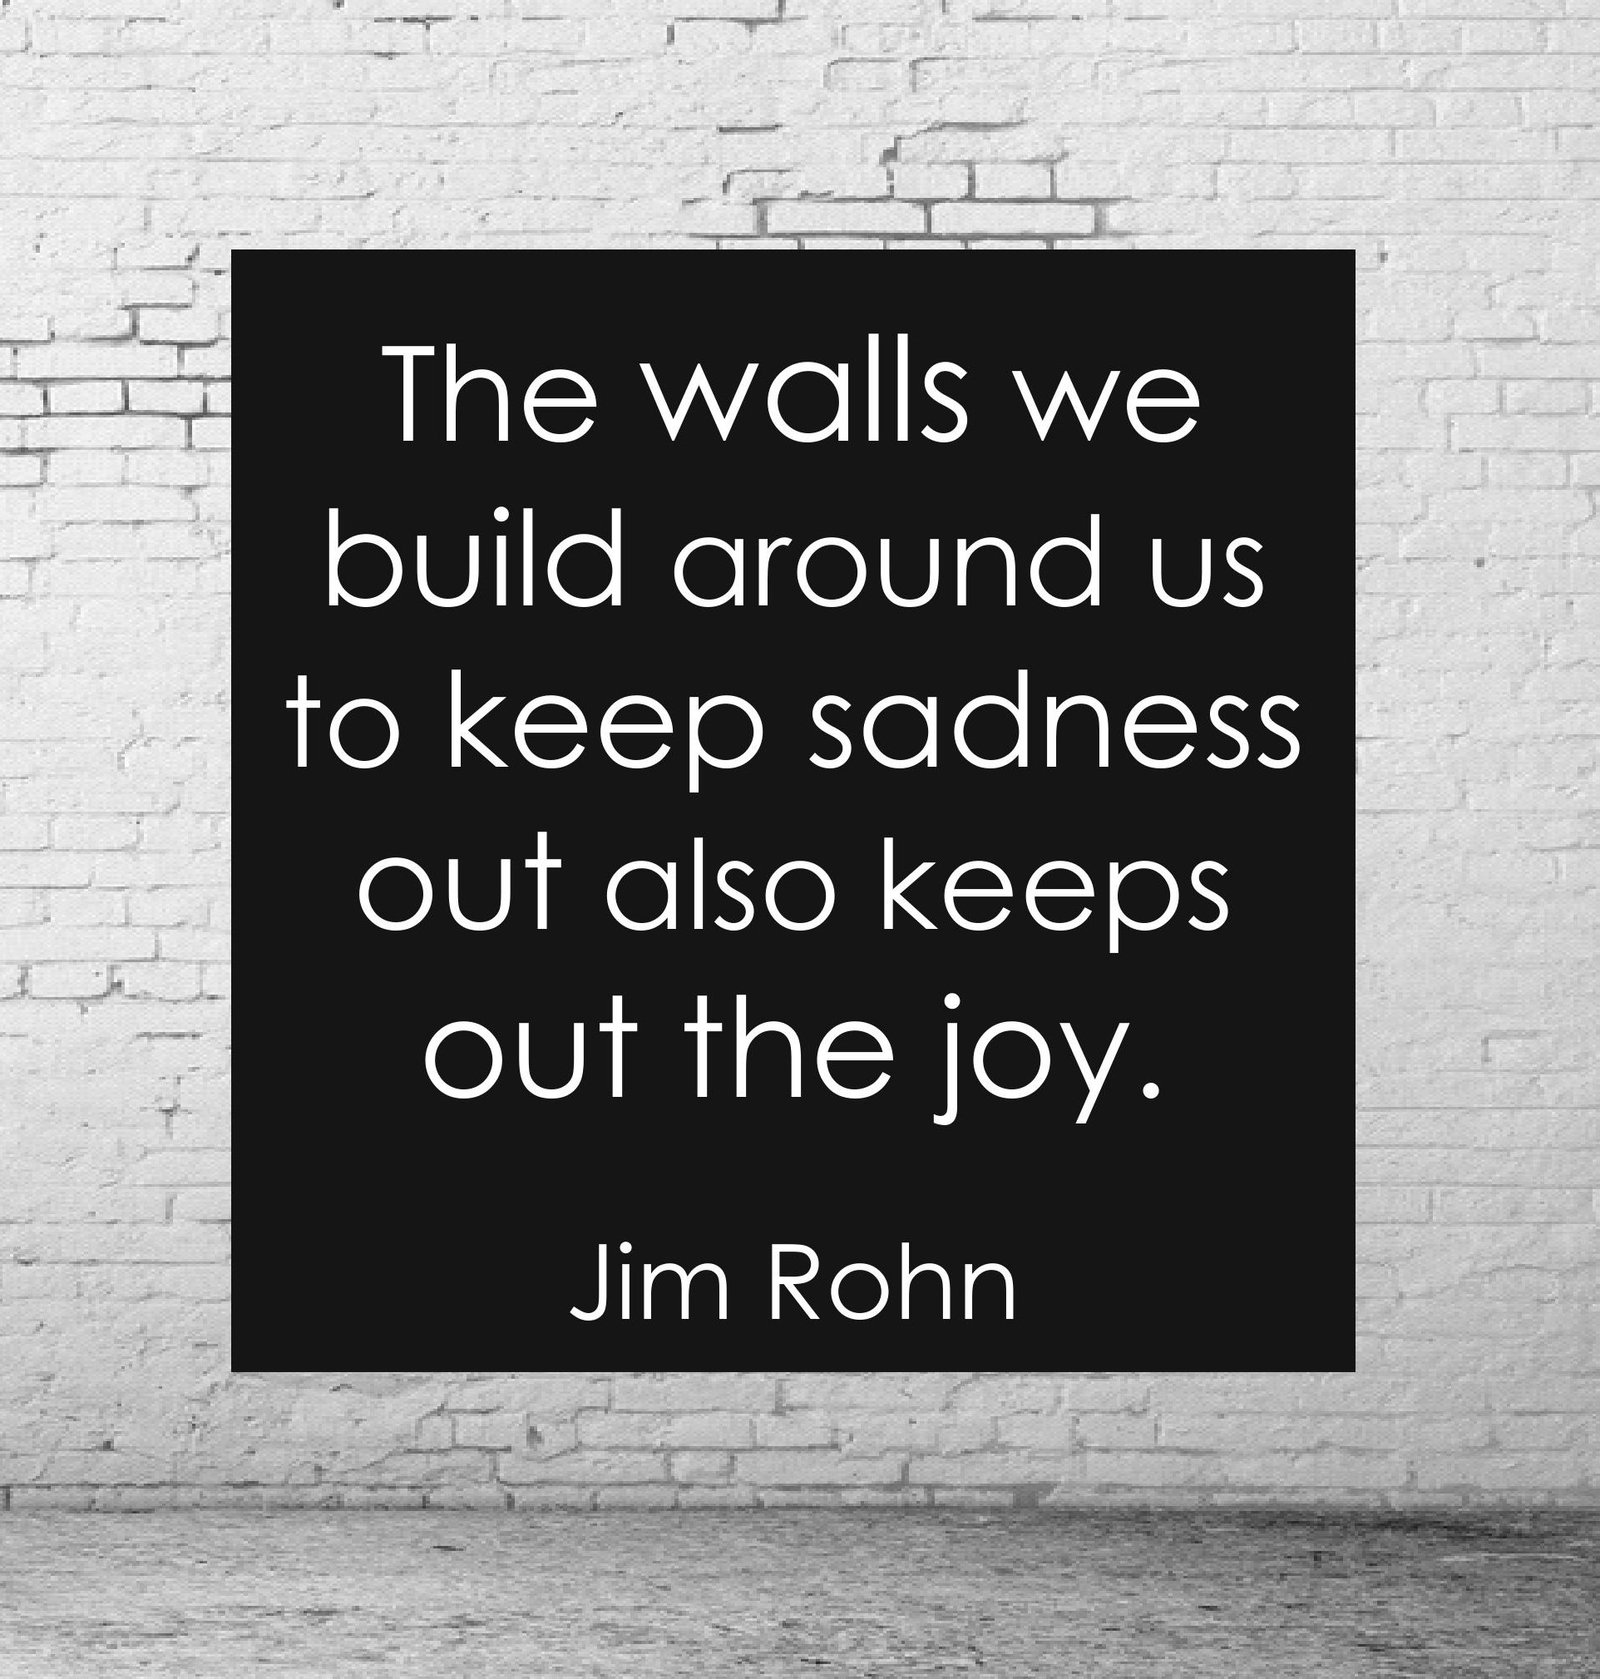 The walls we build around us to keep sadness out also keeps out the joy